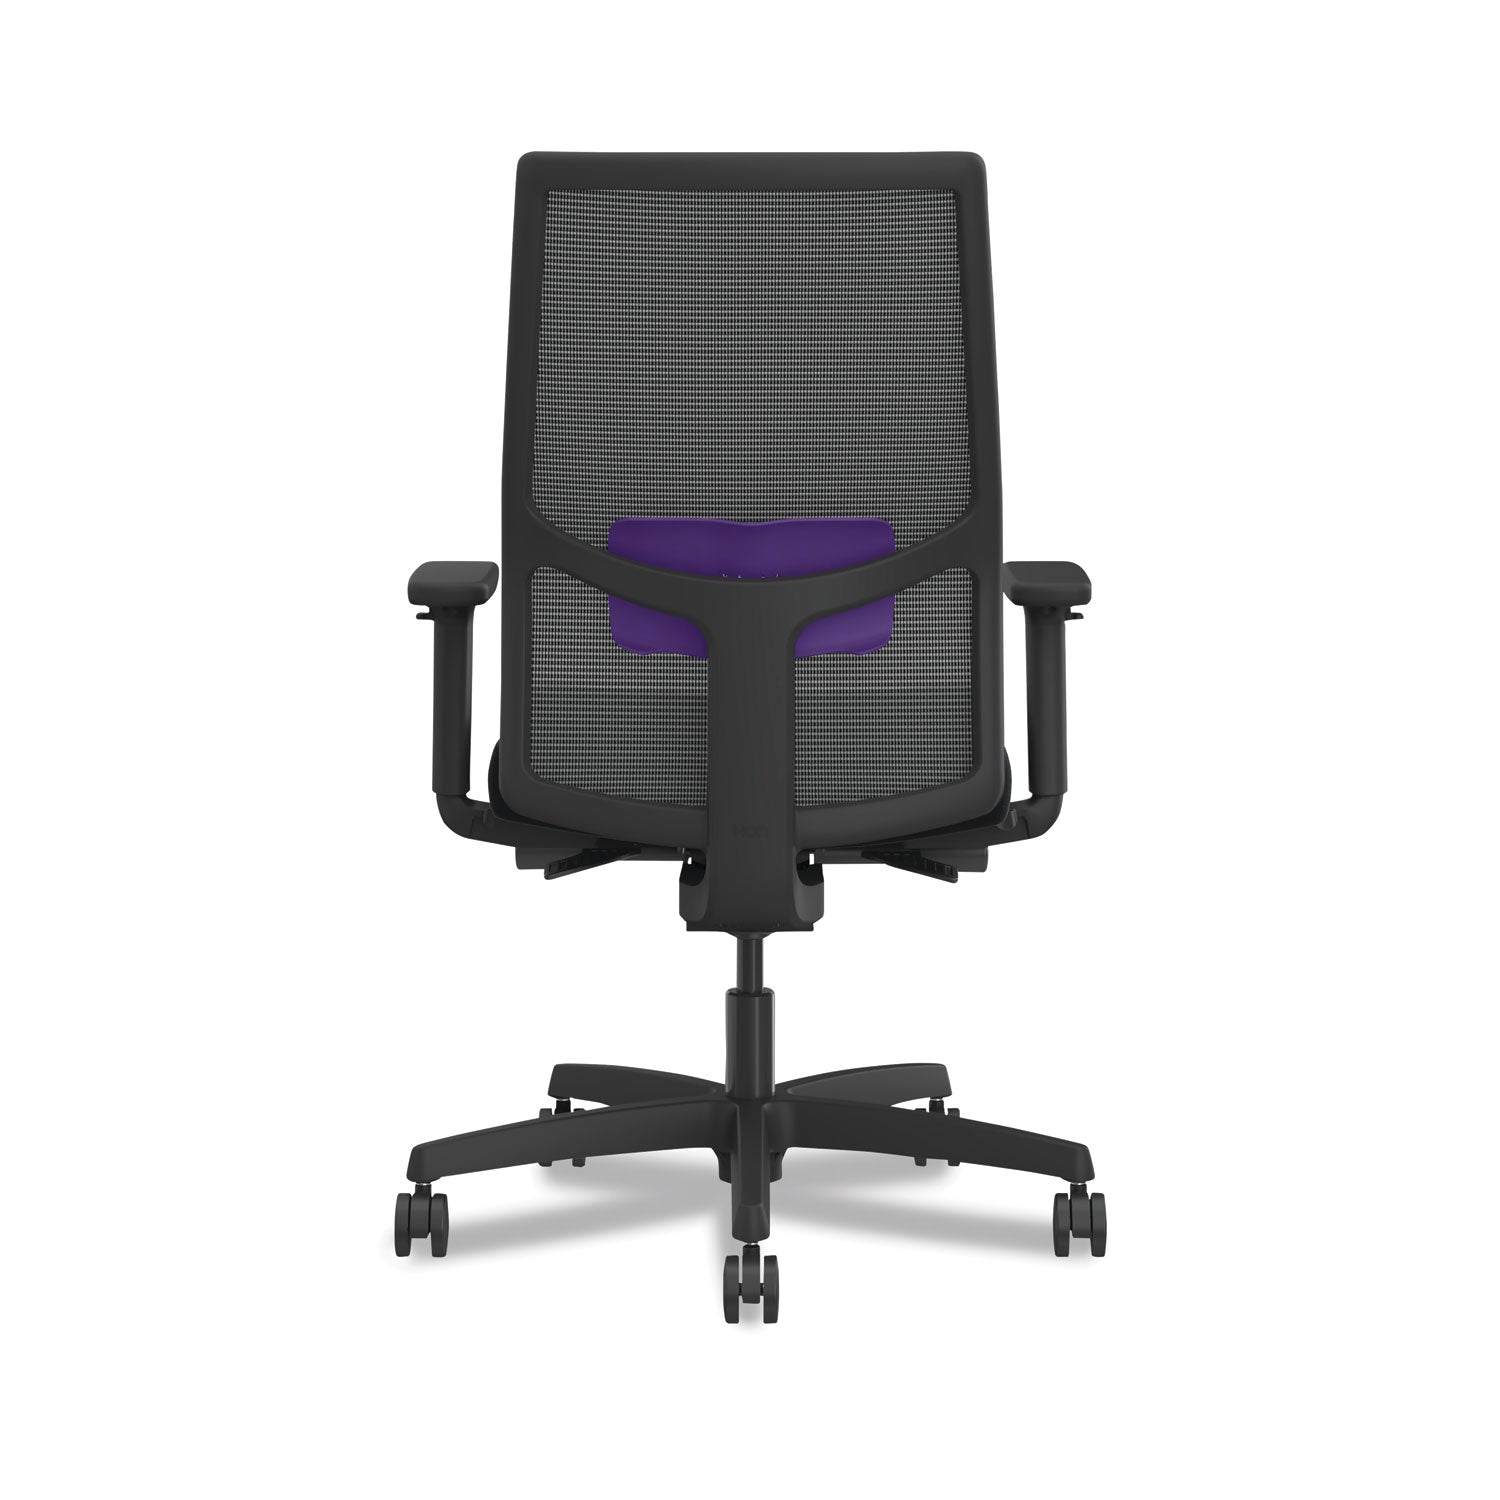 ignition-20-4-way-stretch-mid-back-mesh-task-chair-supports-300-lb-17-to-21-seat-height-black-ships-in-7-10-bus-days_honi2m2amc10irt - 3